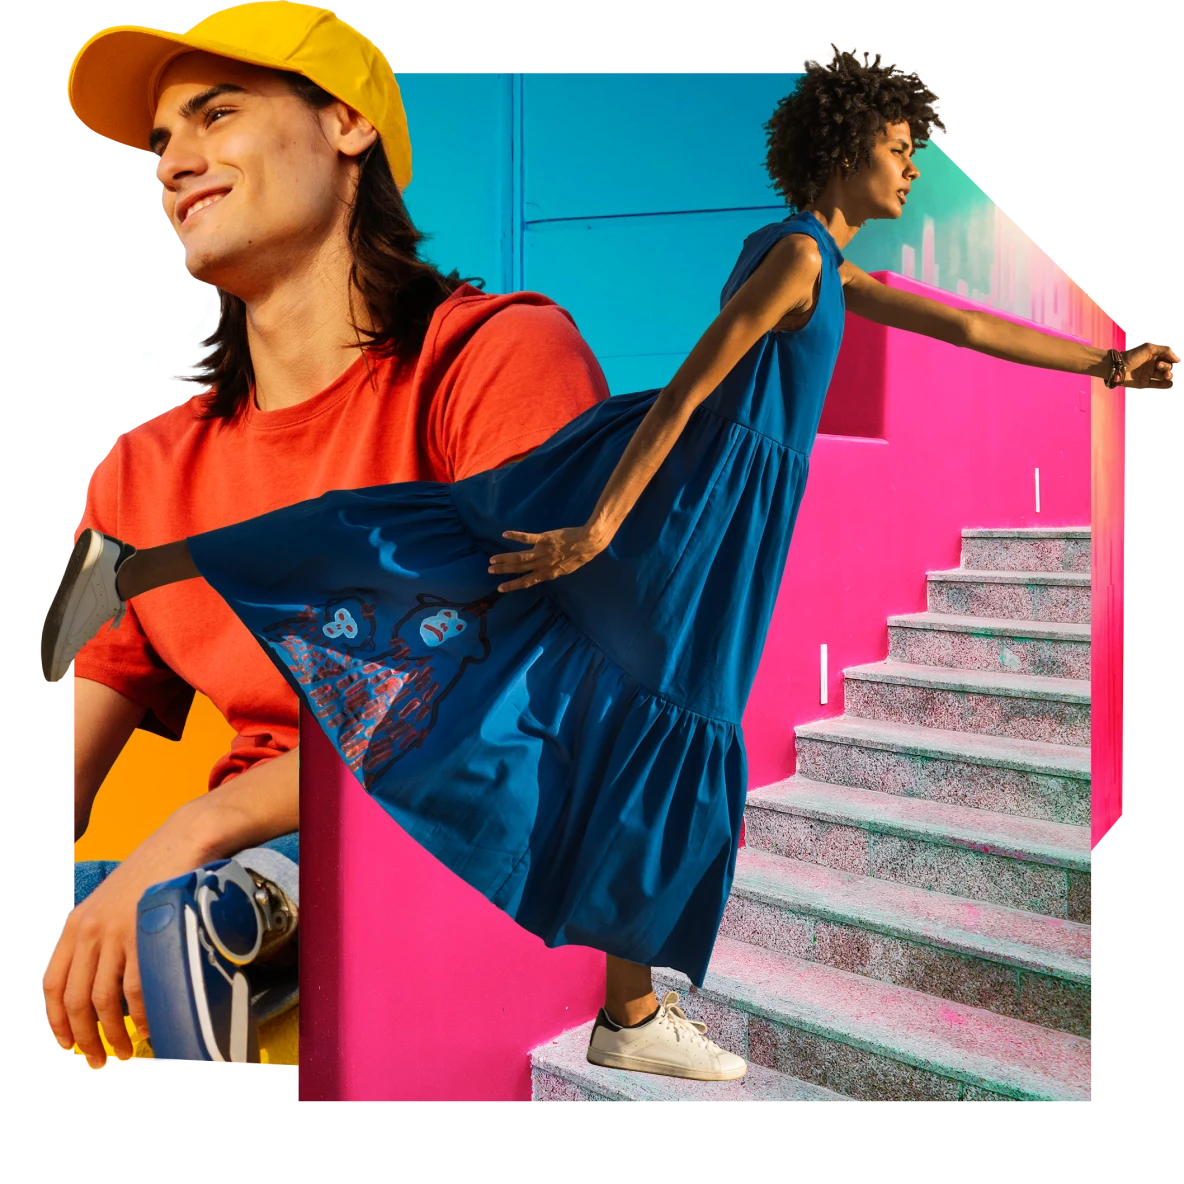 White man with prosthetic legs and long dark hair wears a bright yellow baseball cap and orange shirt. Black woman in a breezy blue dress, walking up gray stairs in a pink stairway. Blue background.